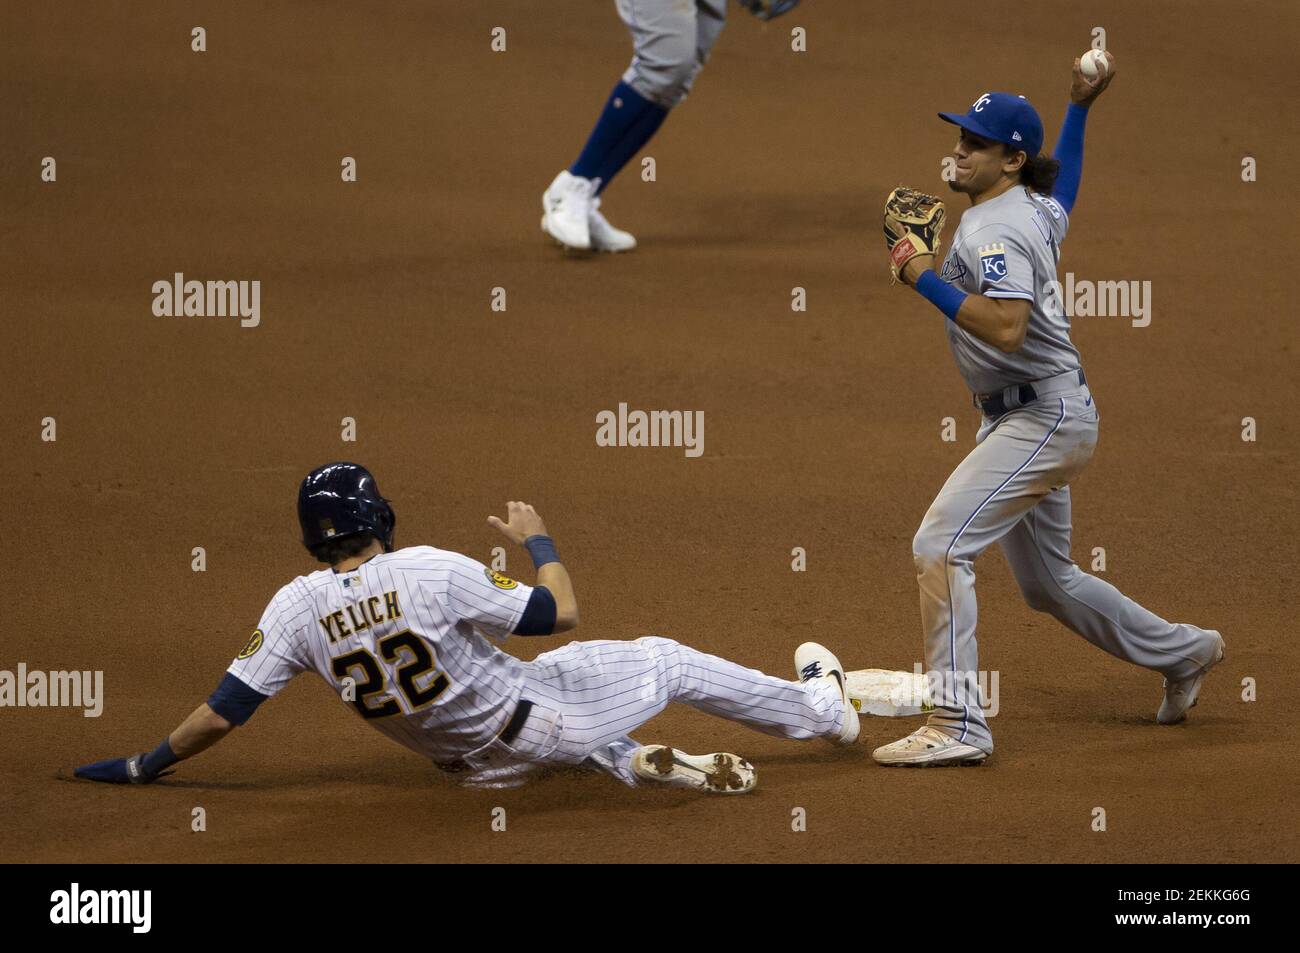 September 19, 2020: Kansas City Royals second baseman Nicky Lopez #1 turns  a double play as Milwaukee Brewers right fielder Christian Yelich #22  slides into second base during the Major League Baseball